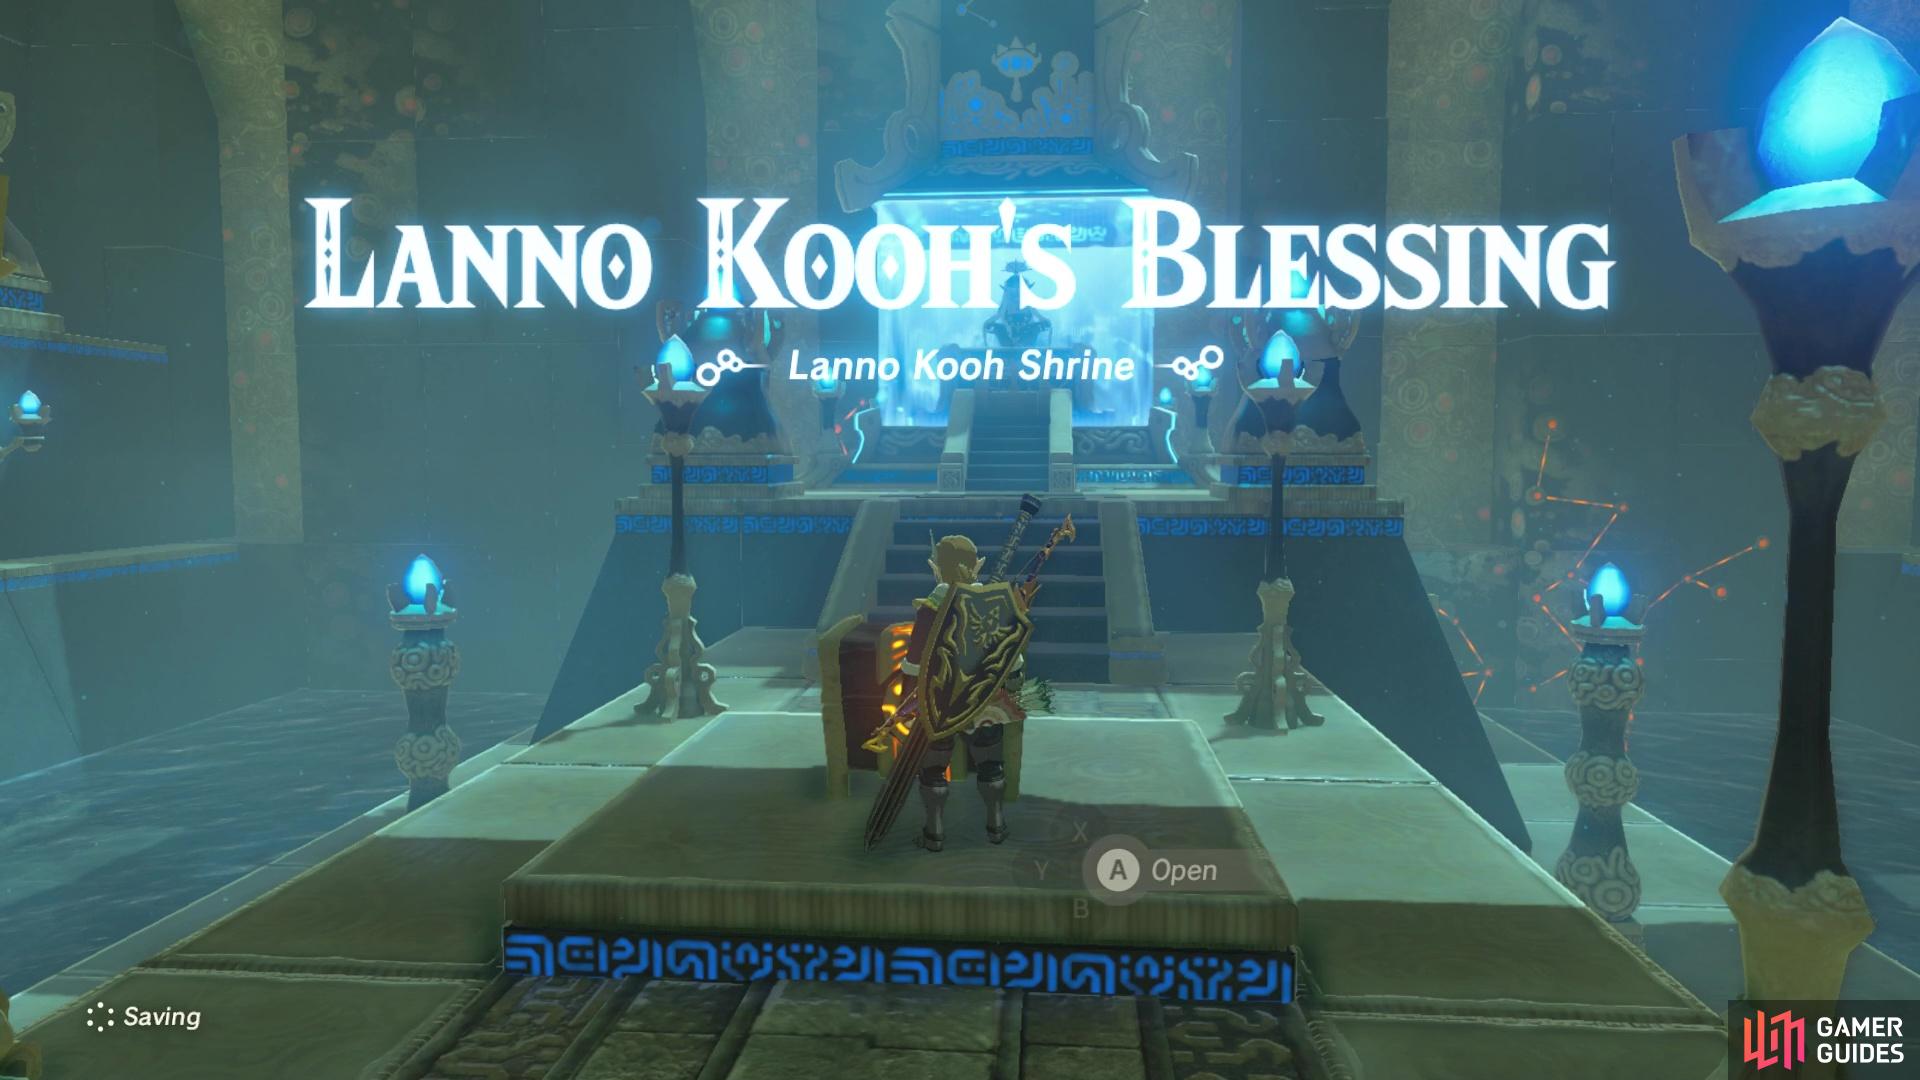 Lanno Kooh is a blessing shrine!